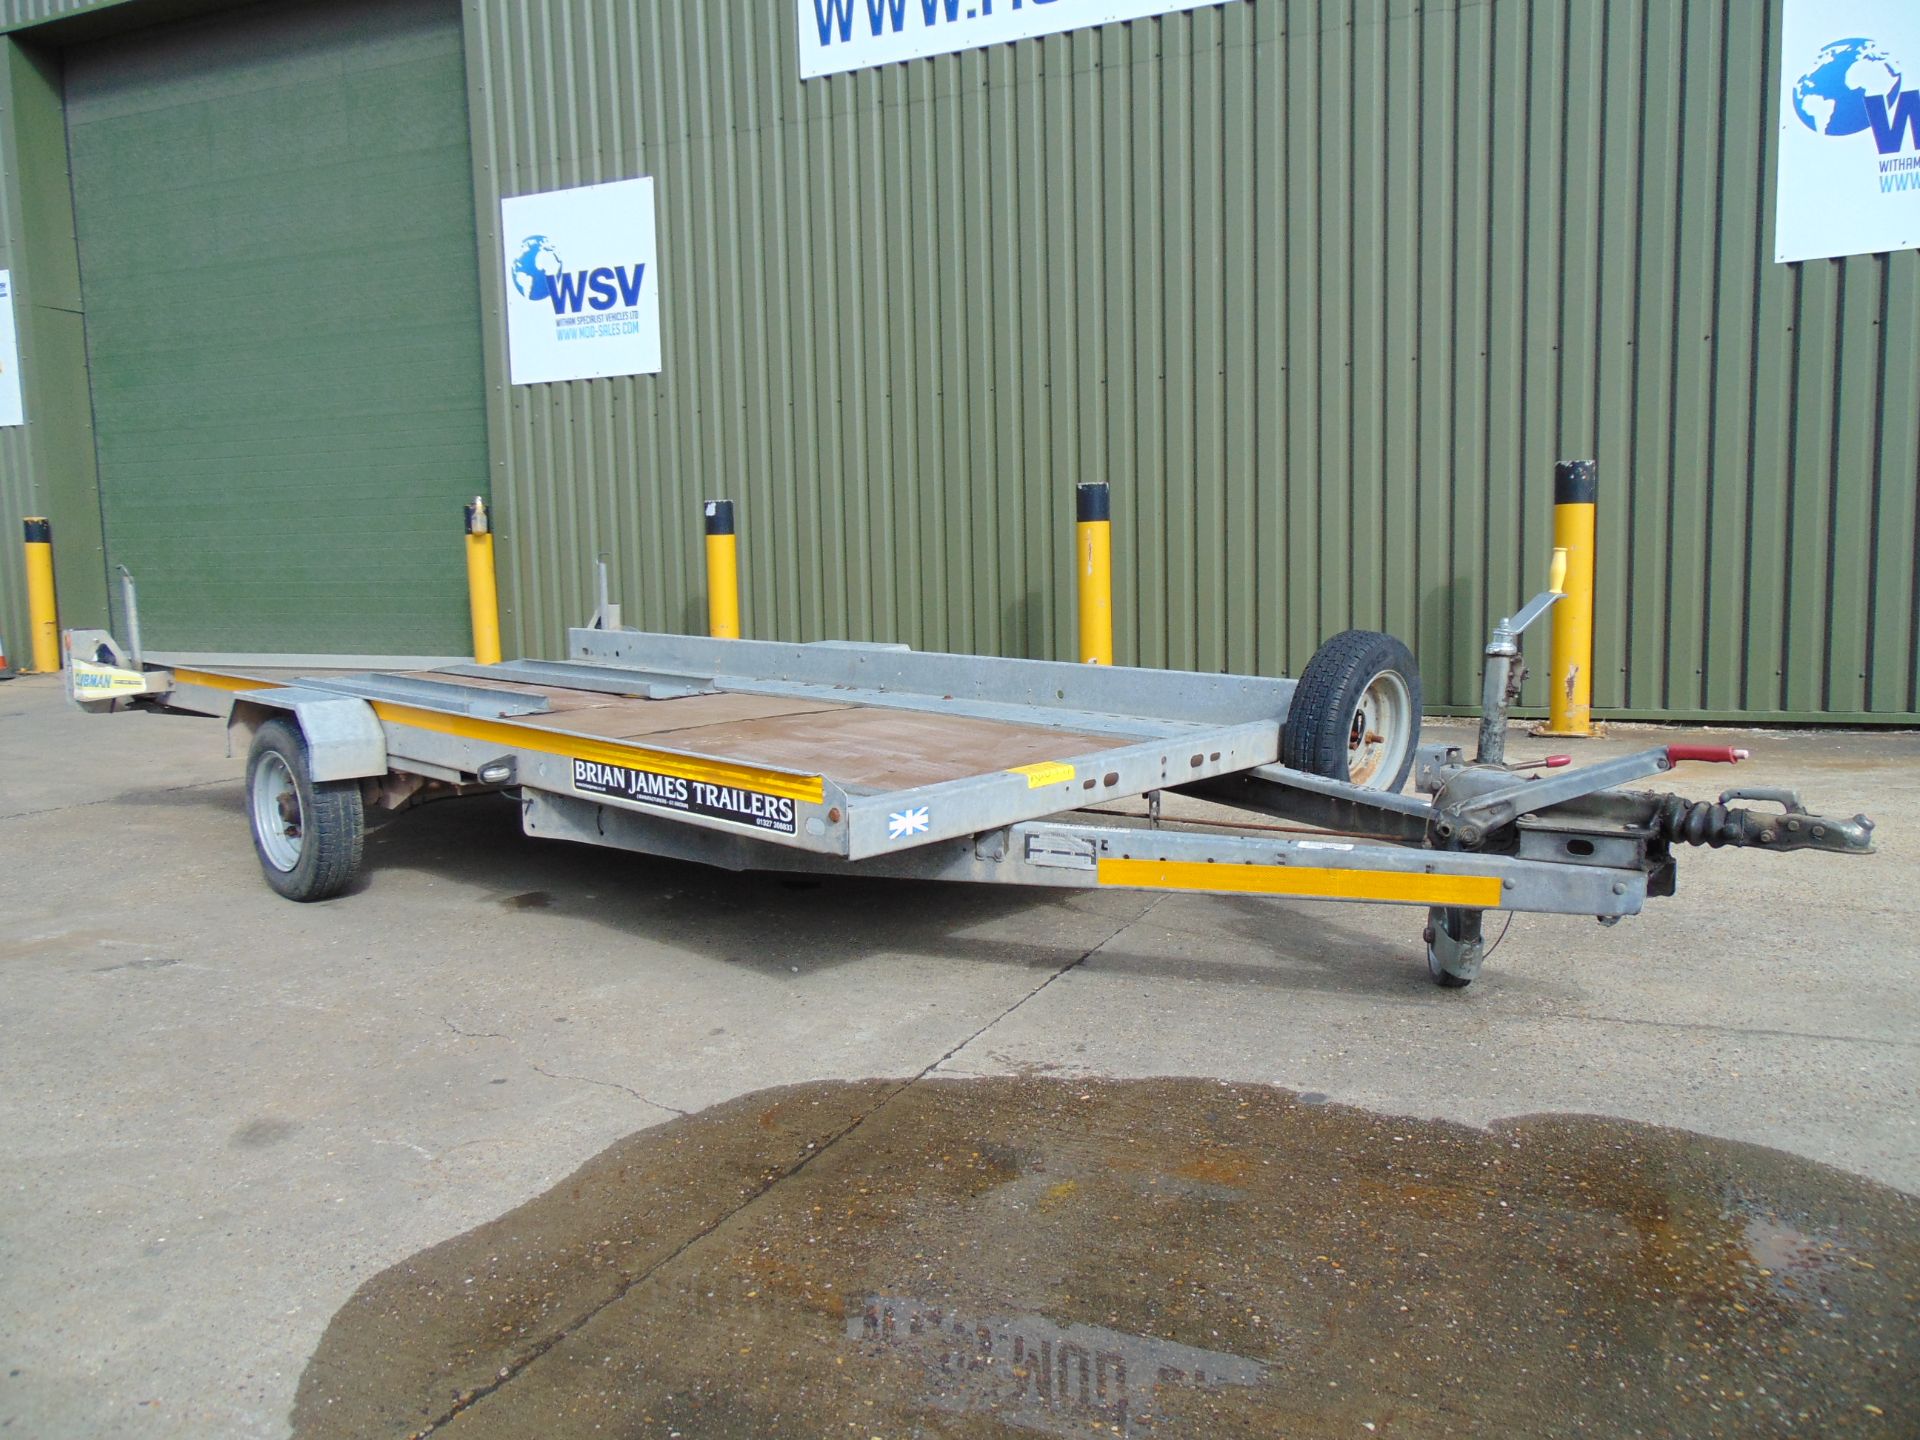 Brian James Clubman Single Axle Car Transporter Trailer with Ramps - Image 2 of 17